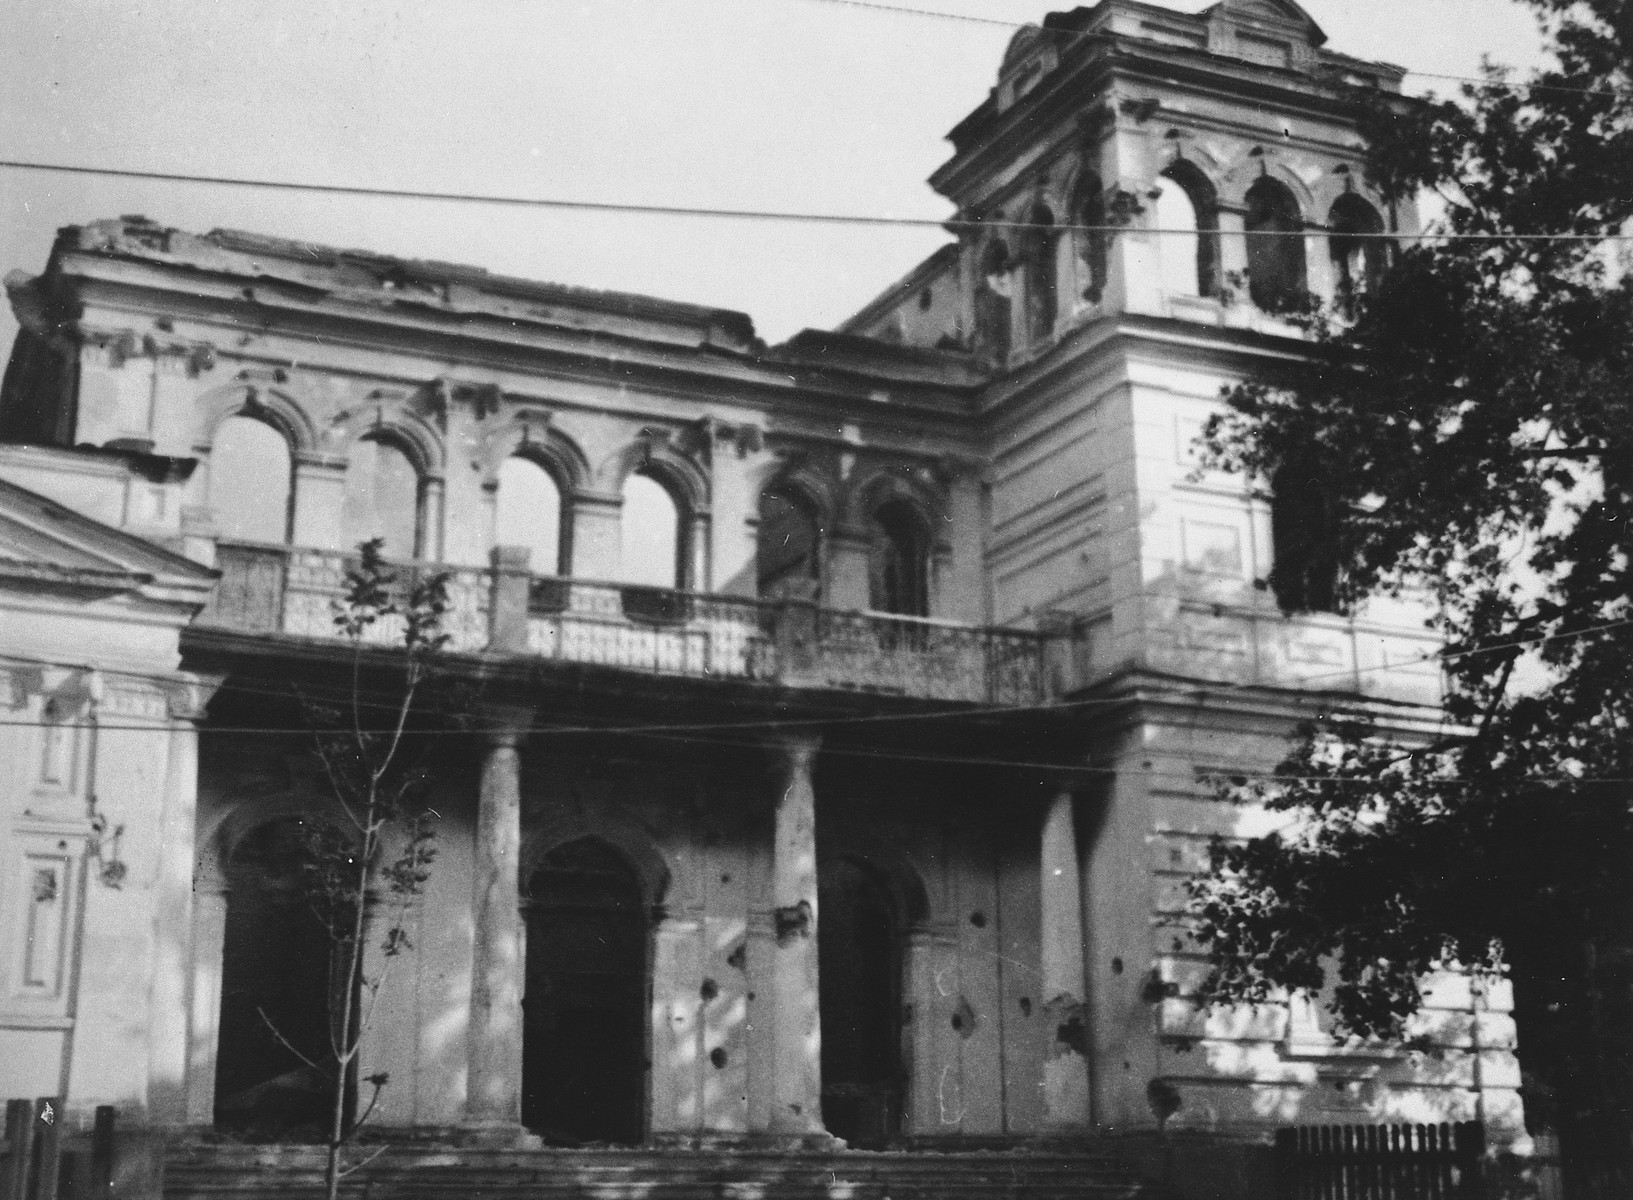 Exterior view of a large war-damaged building in the Warsaw ghetto.